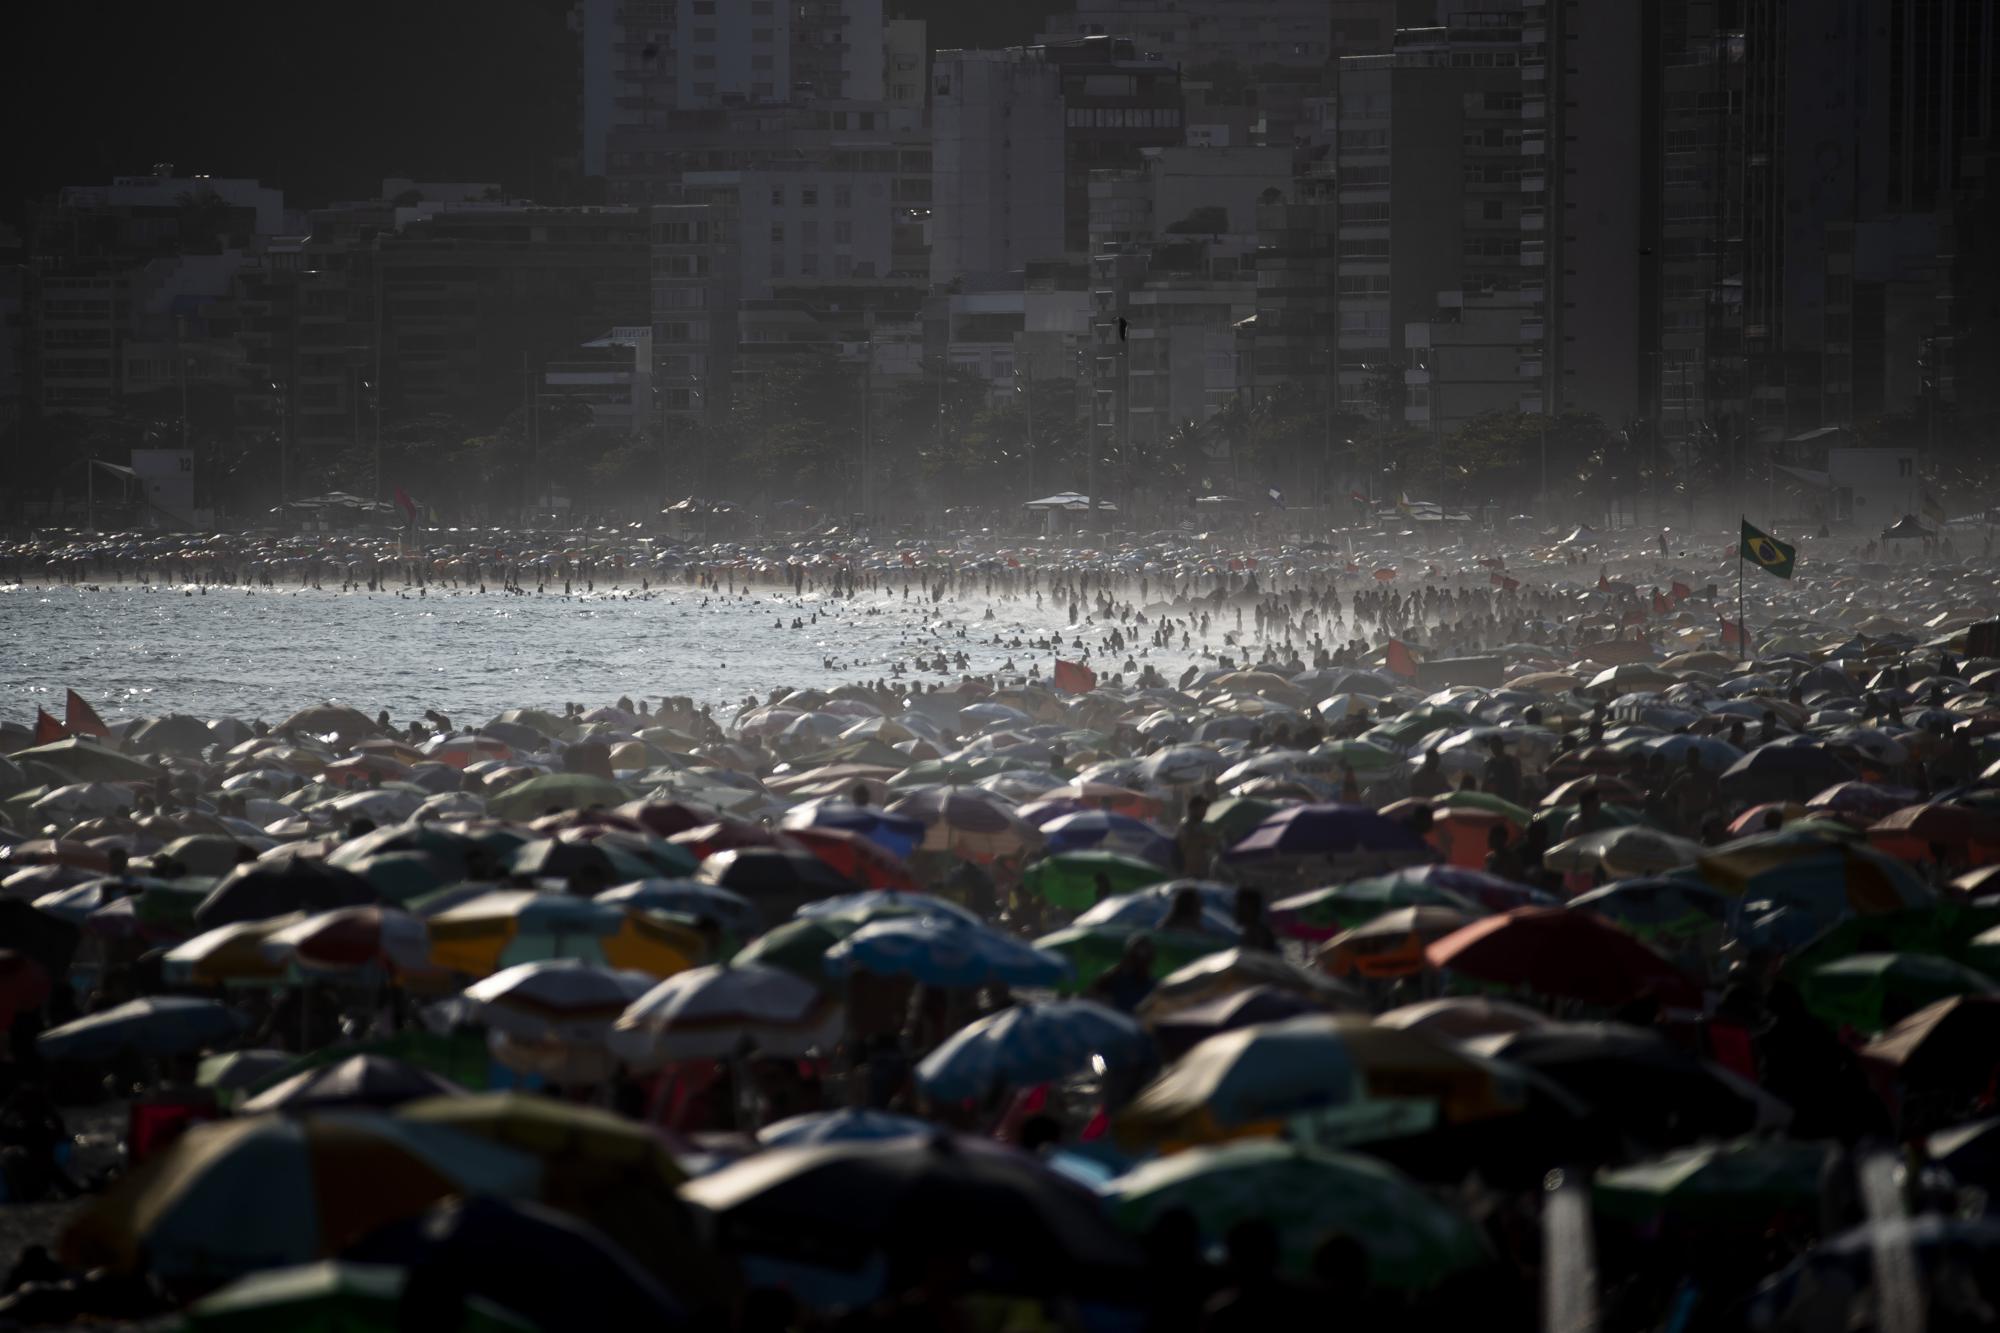 People enjoy the Ipanema beach, in Rio de Janeiro, Brazil, Sunday, Nov.13, 2022. The world's population is projected to hit an estimated 8 billion people on Tuesday, Nov. 15, according to a United Nations projection. (AP Photo/Bruna Prado)